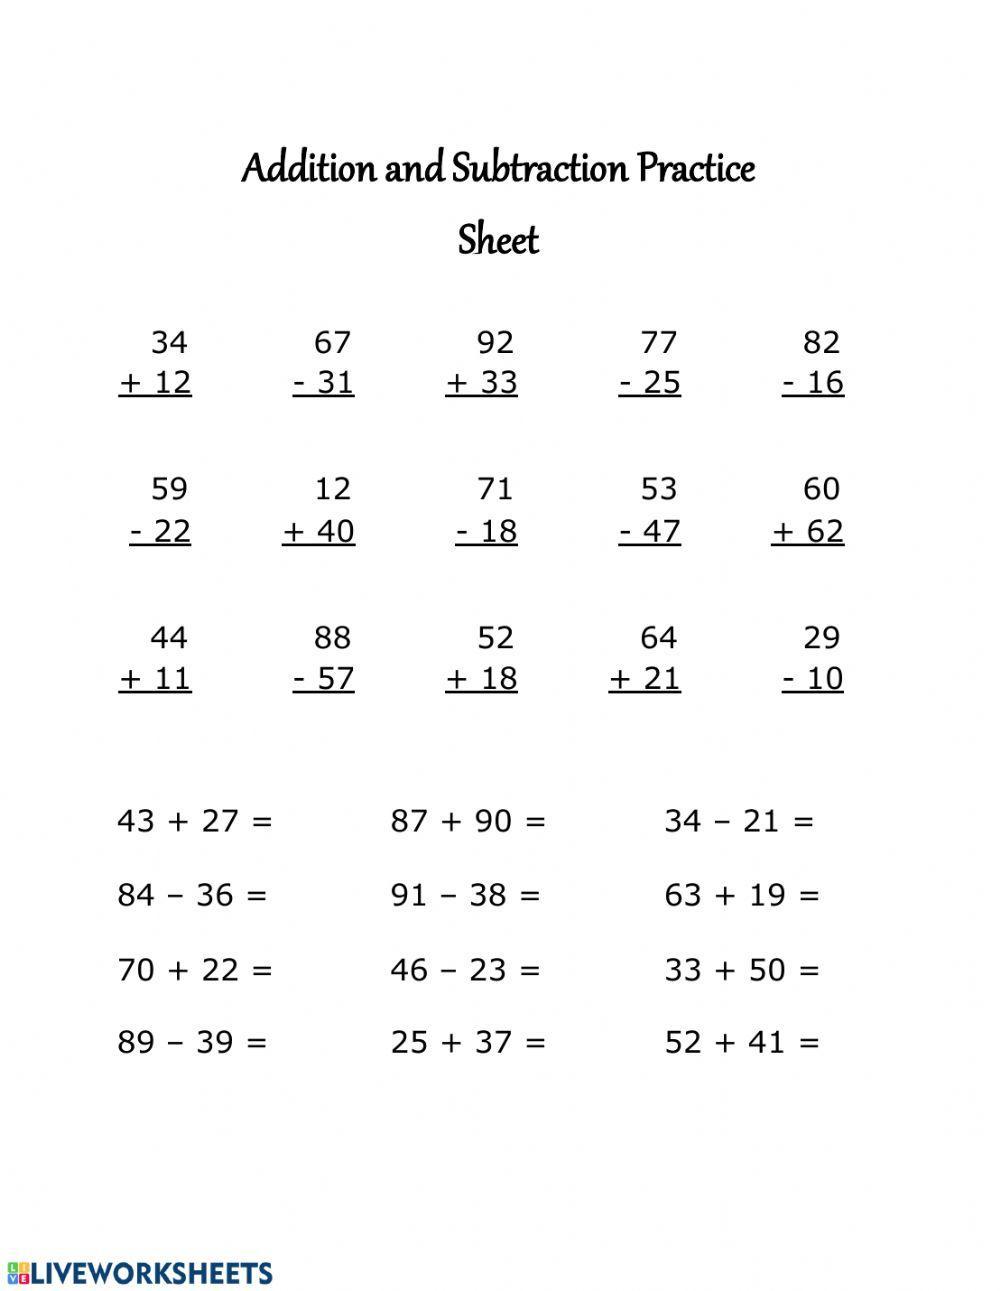 Addition and Subtraction Practice Sheet